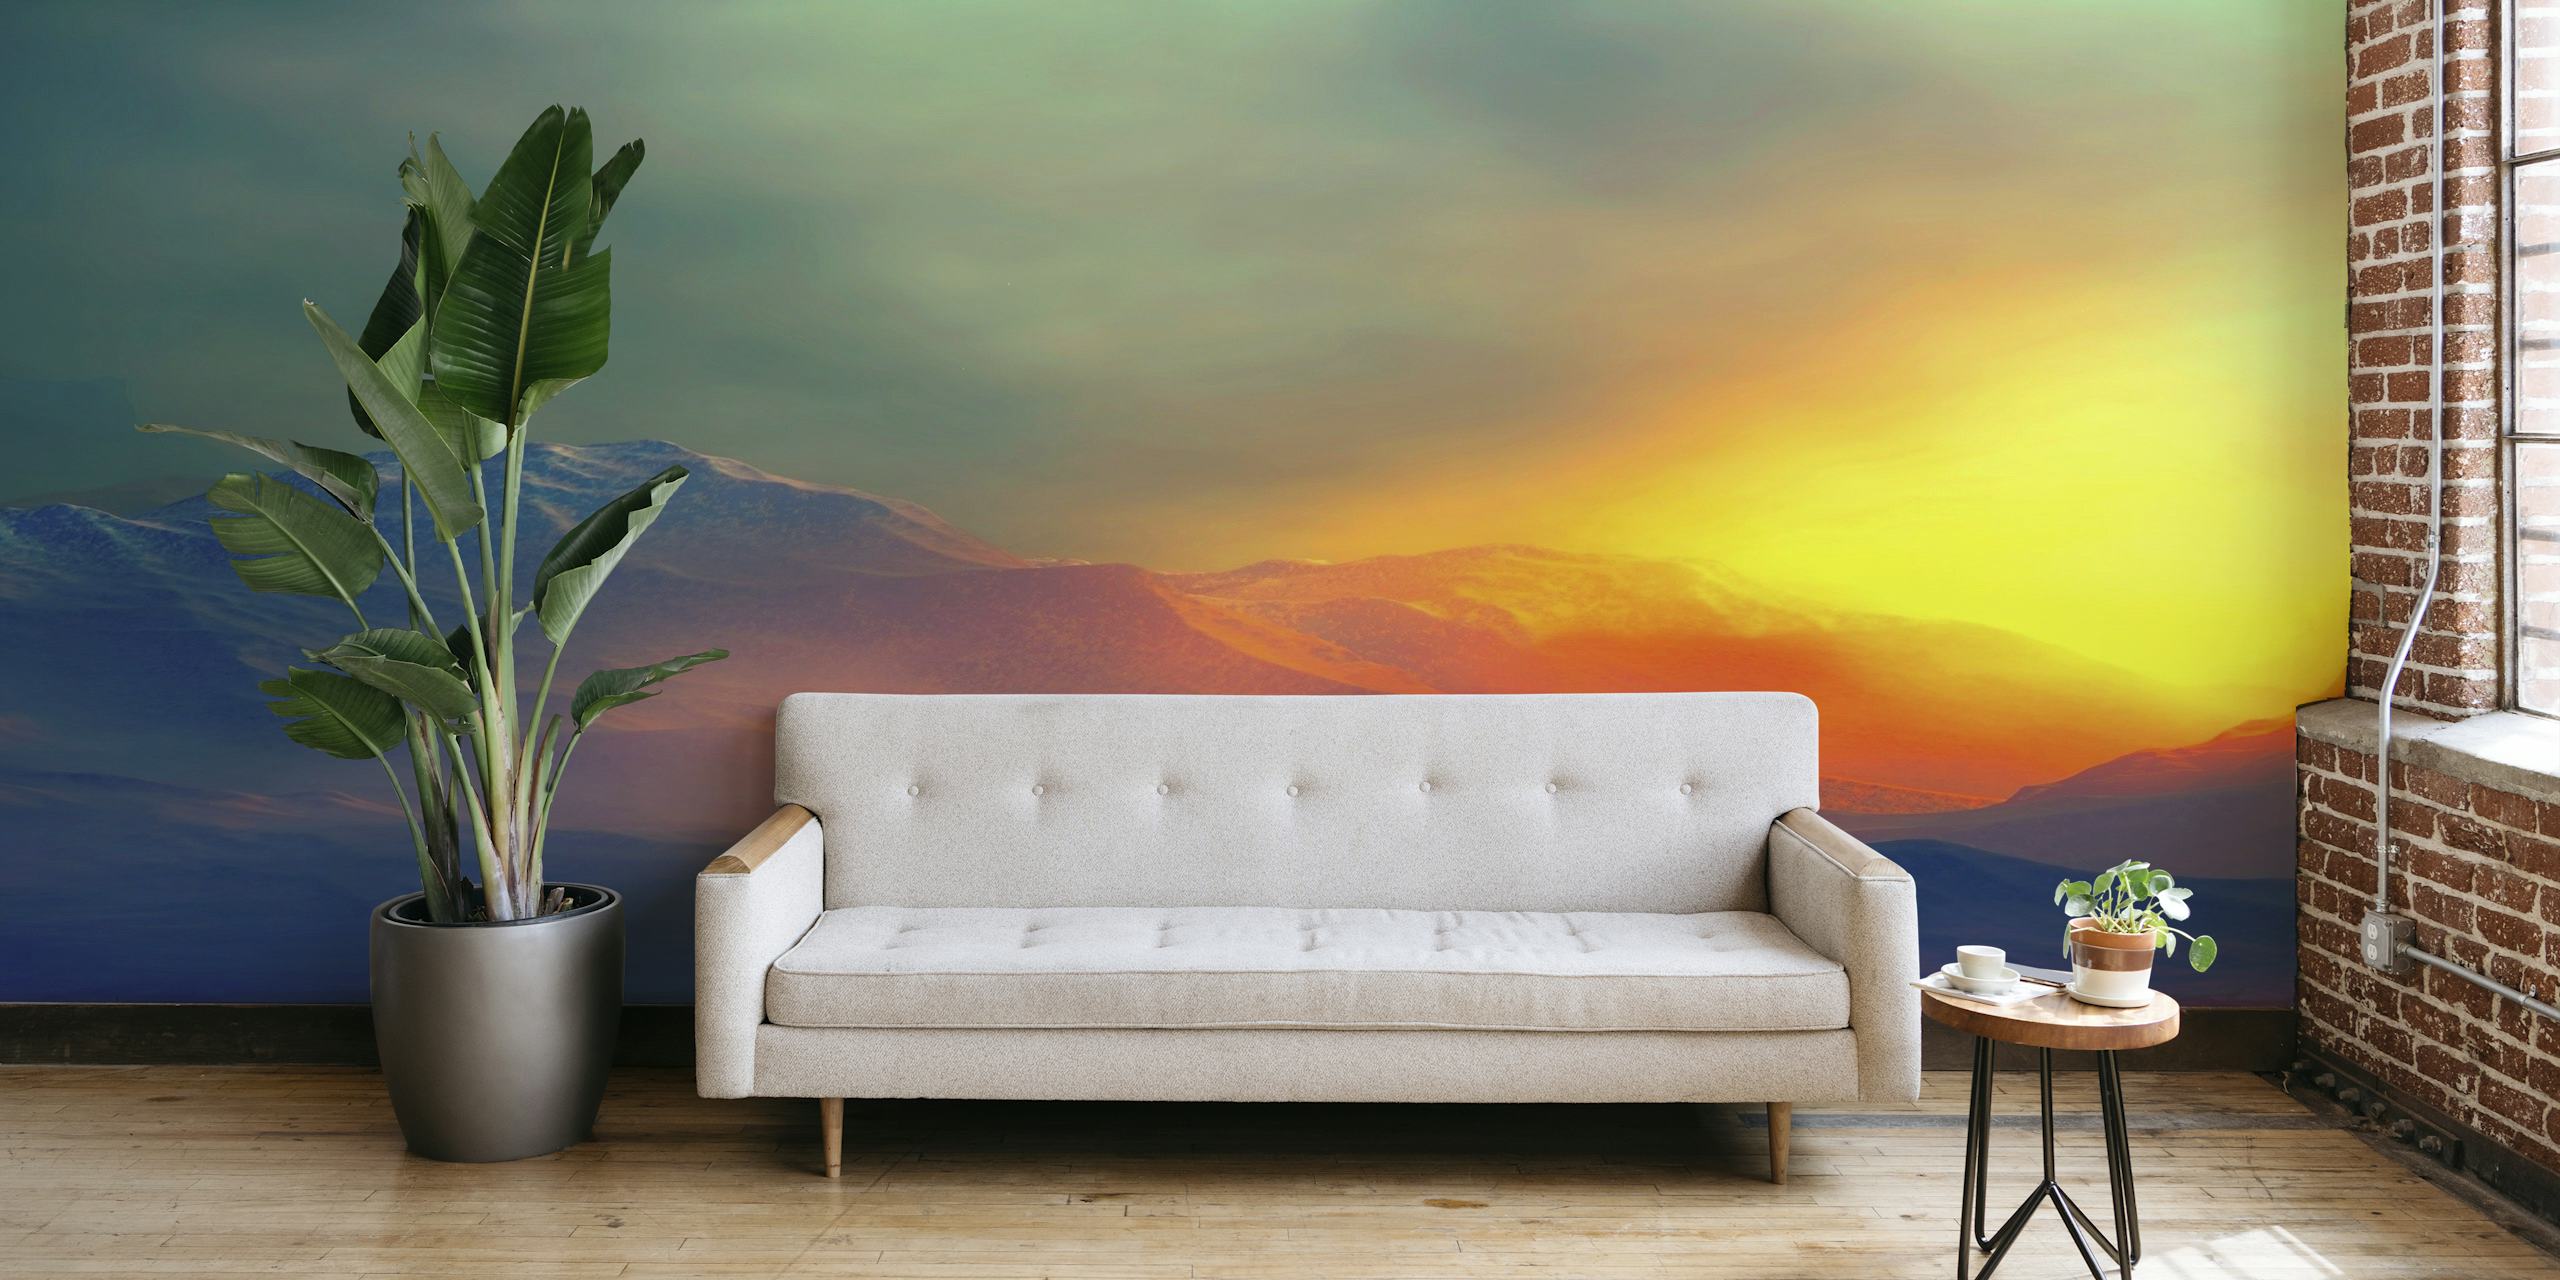 Wall mural featuring mountains bathed in the warm glow of sunset with vivid oranges and cool purples blending on the horizon